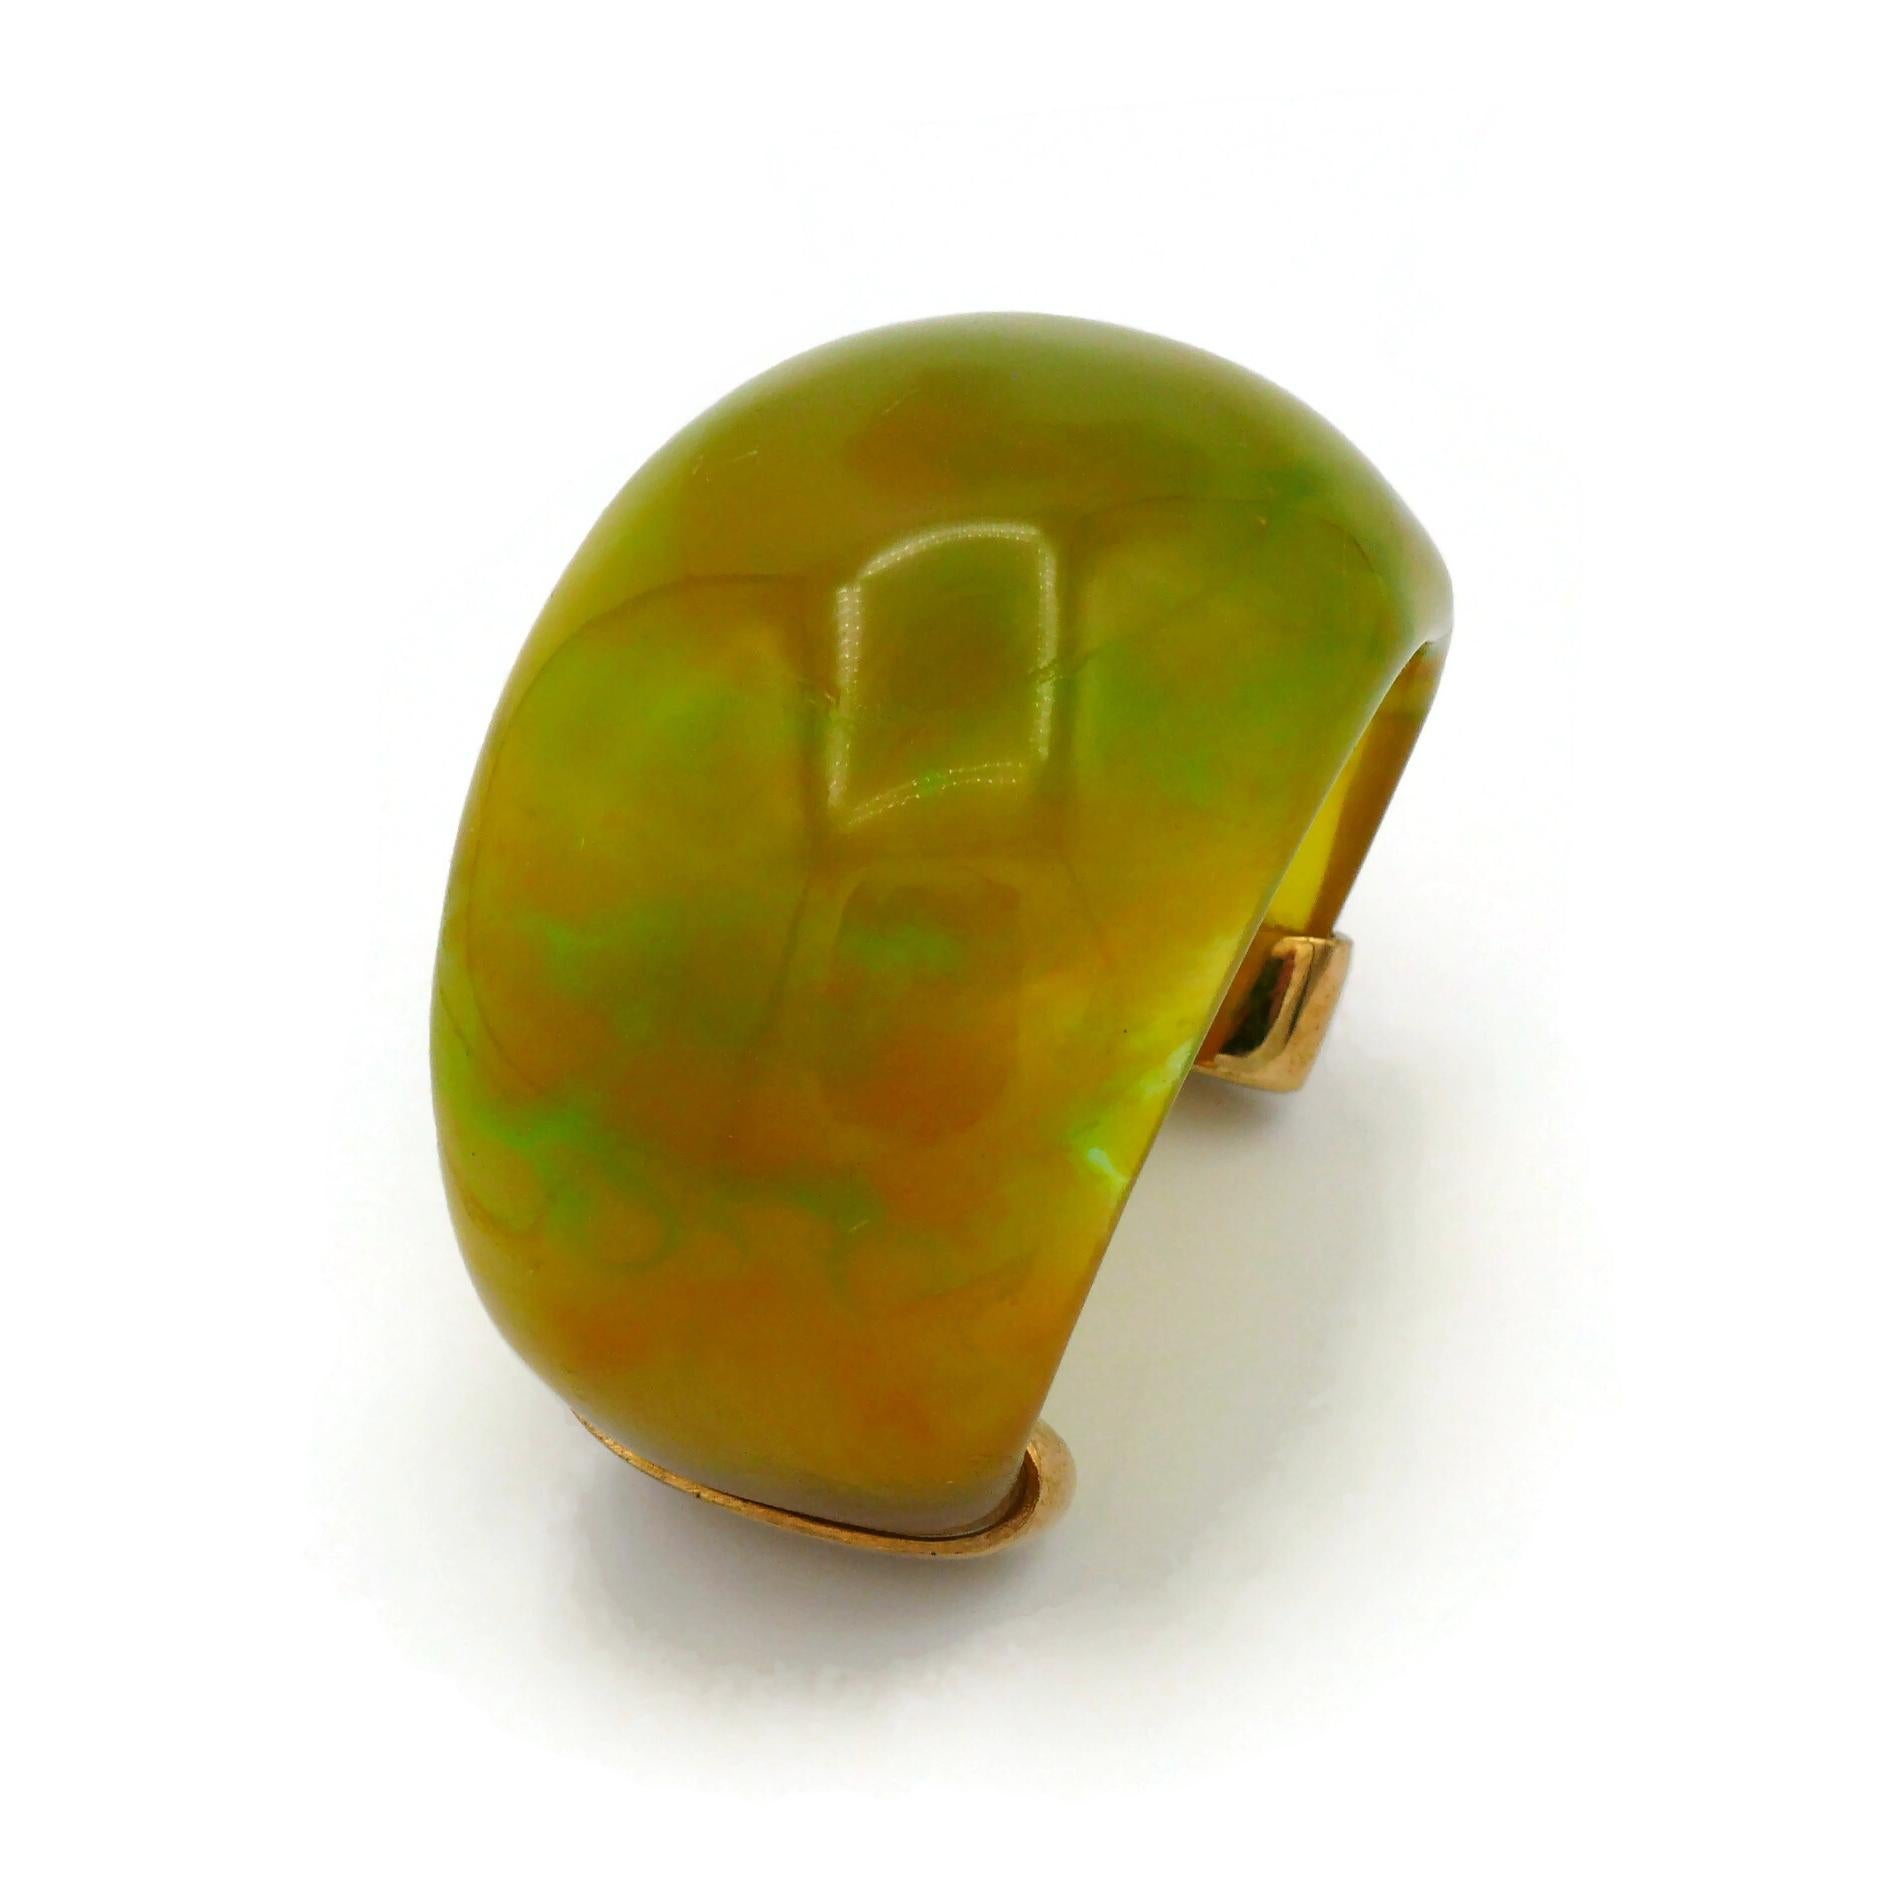 YVES SAINT LAURENT YSL Vintage Yellow Green Marbled Resin Cuff Bracelet For Sale 2